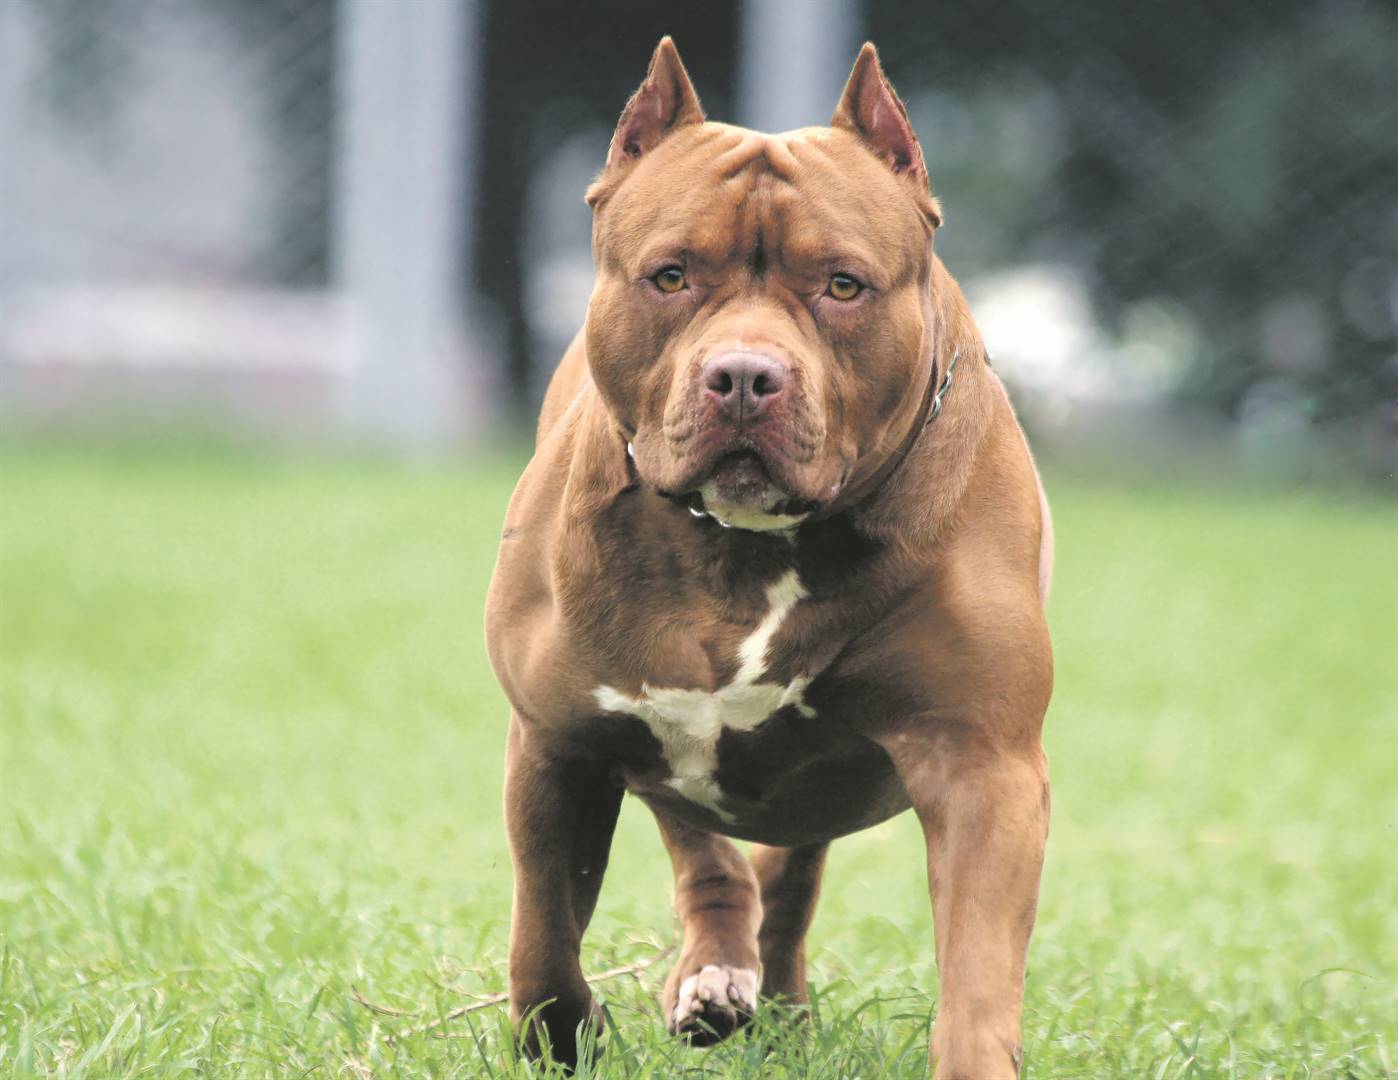 A petition calling for a ban of pit bulls was handed over to government.